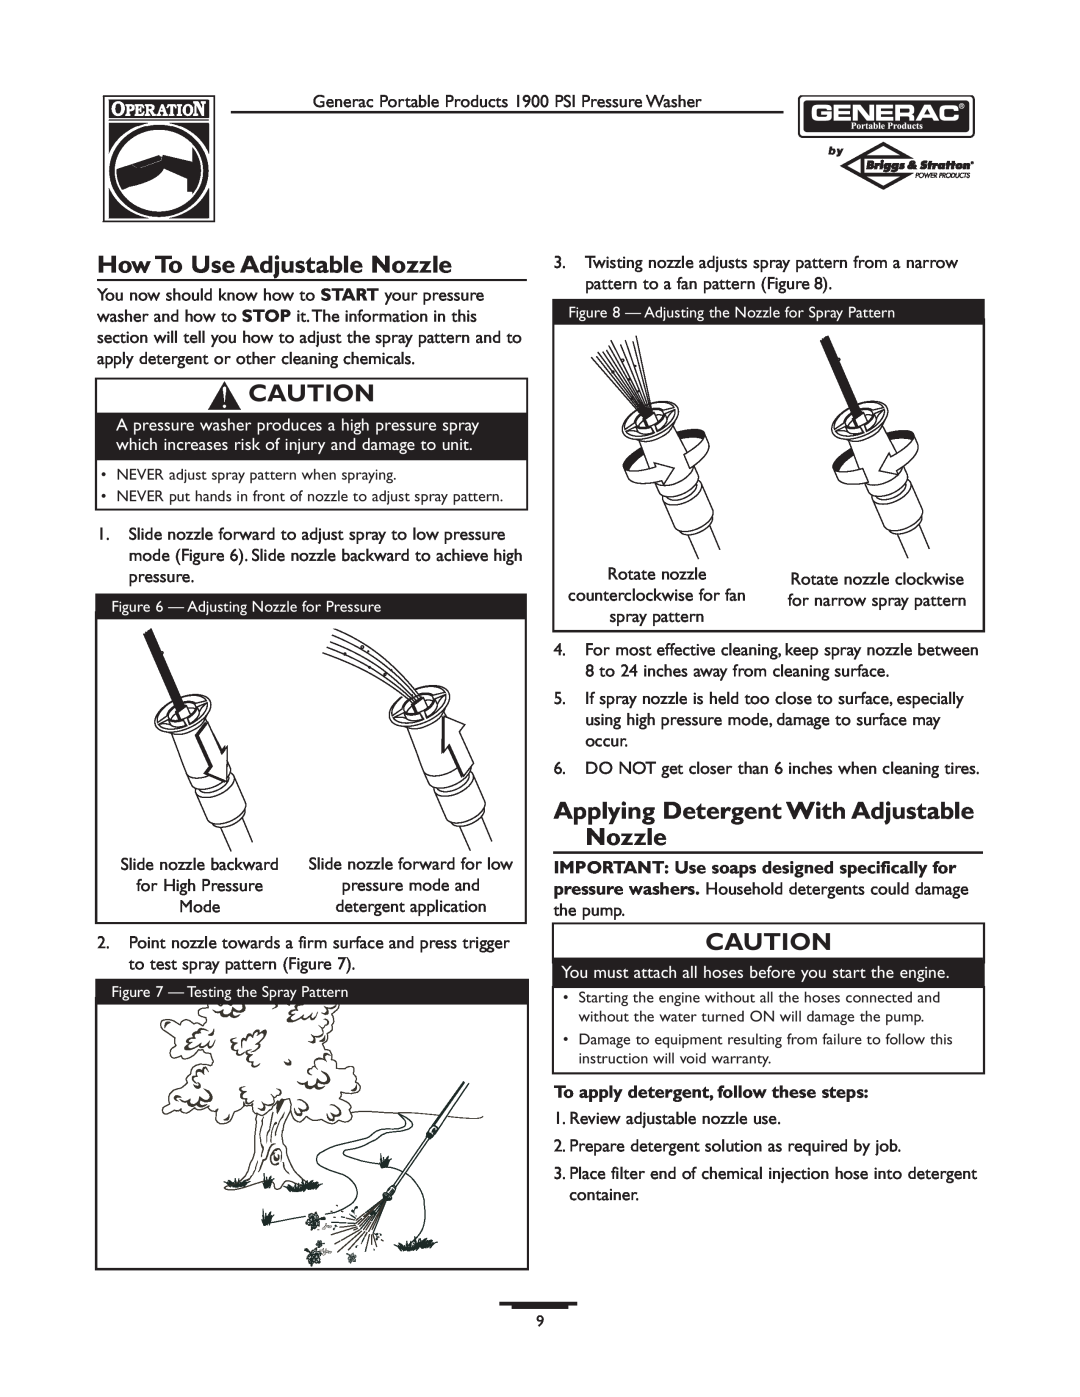 Briggs & Stratton 1900PSI owner manual How To Use Adjustable Nozzle, Applying Detergent With Adjustable Nozzle 